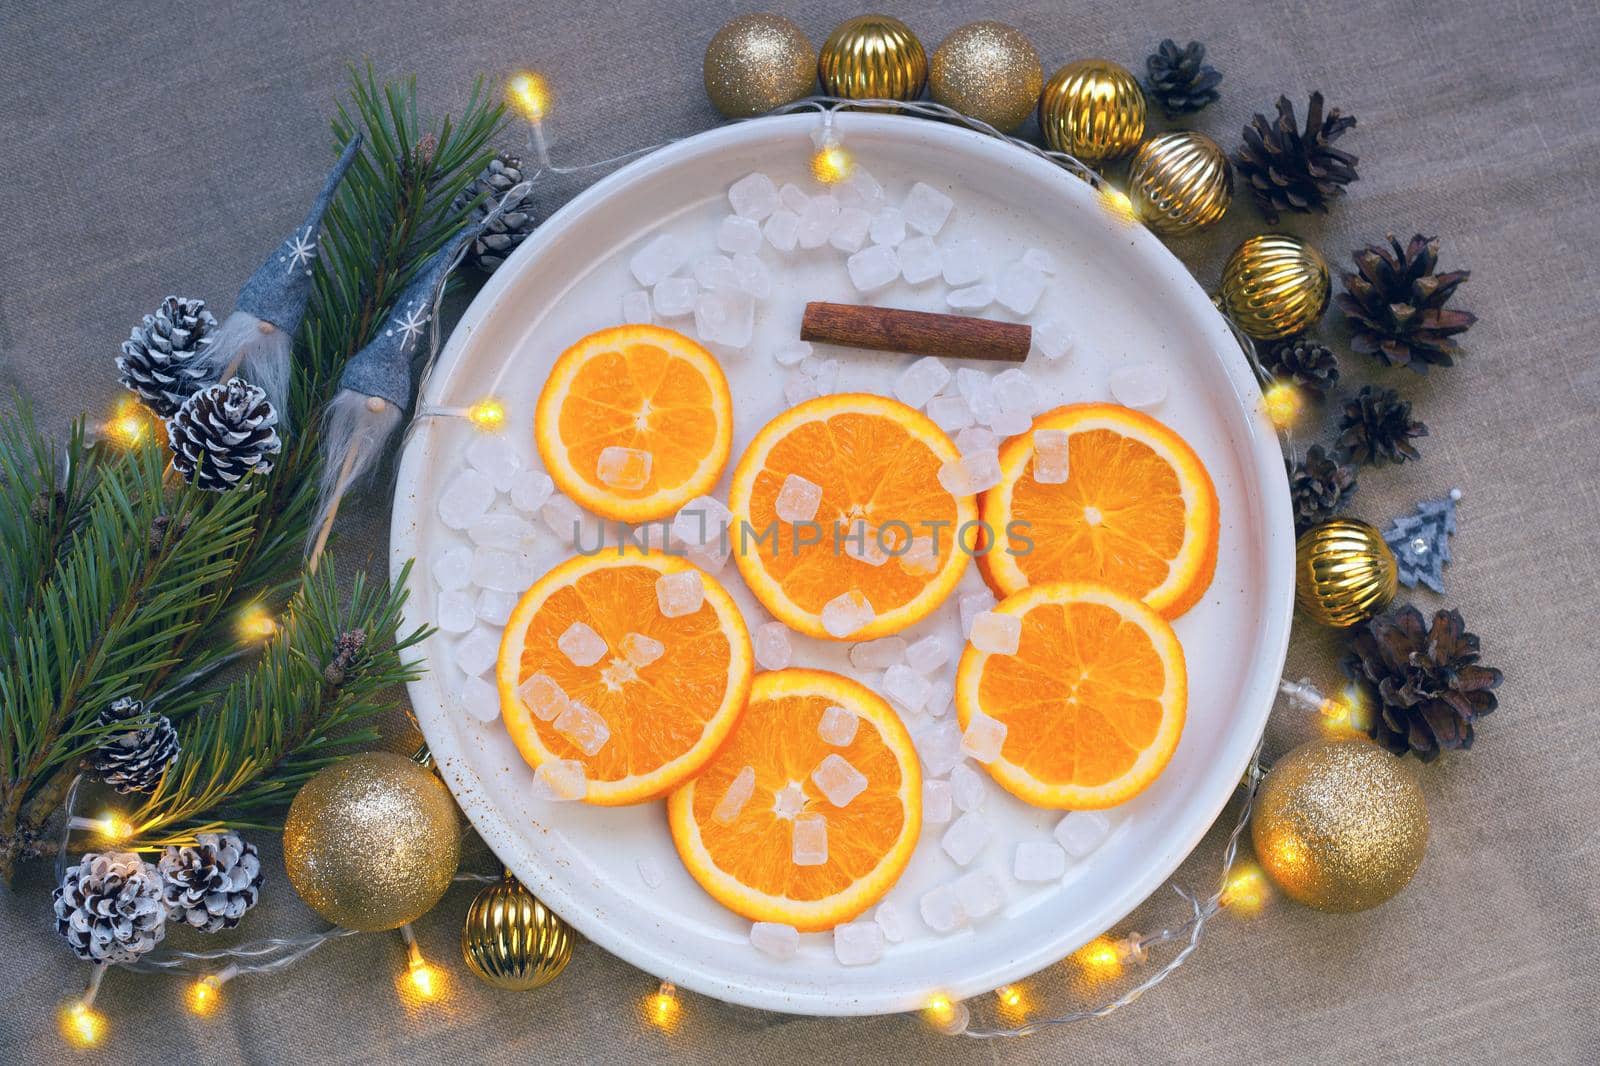 oranges at the plate near christmas tree branch, candies, cinnamon, golden balls and pine cones. Cristmas decorations. Tangerines and on plate